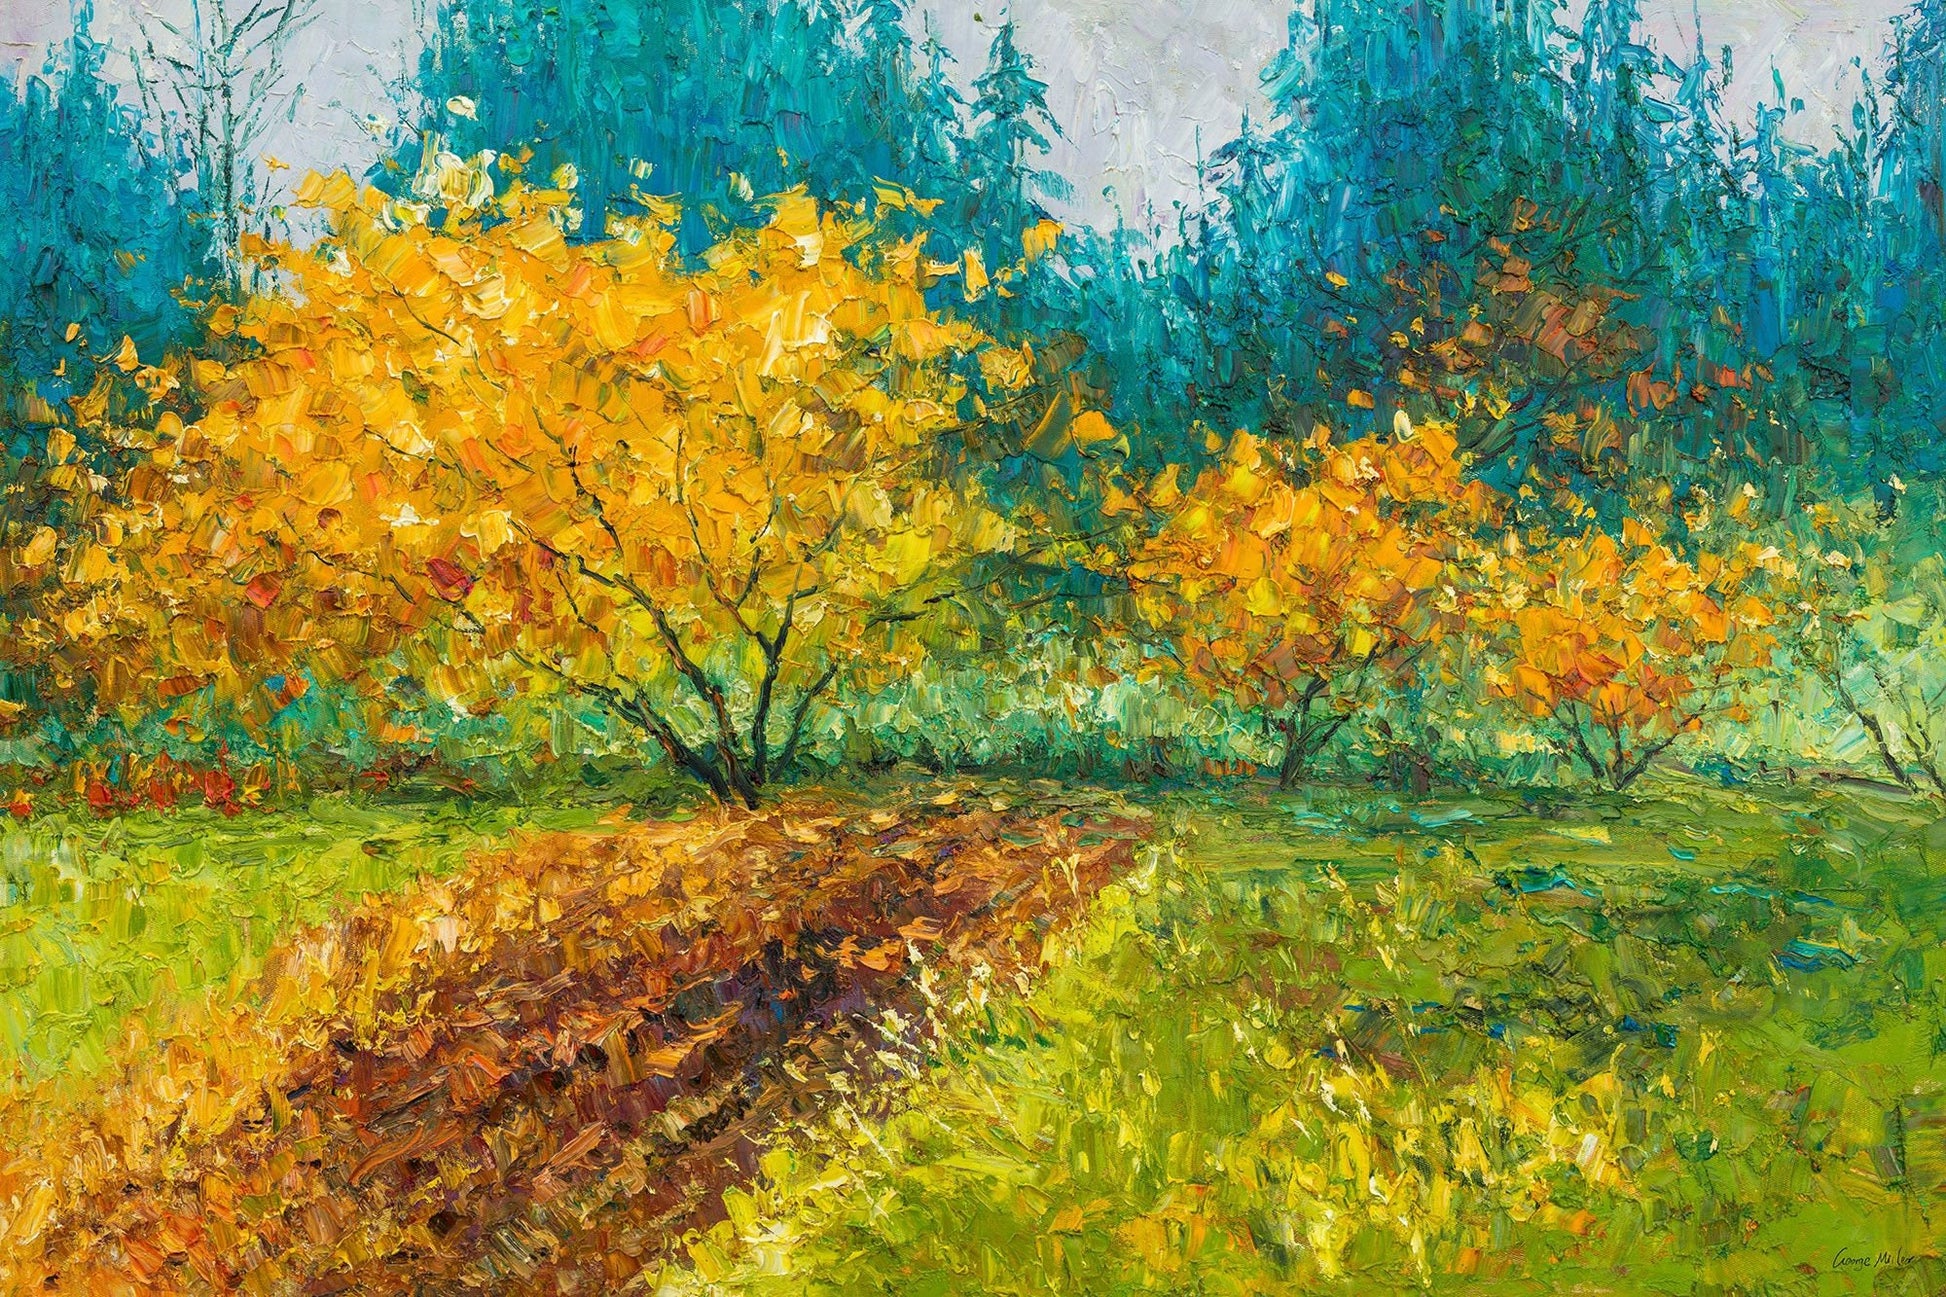 Landscape Oil Painting Spring Forest Original Art, Fine Art, Wall Art Painting, Landscape Wall Art, Extra Large Painting, Modern Painting